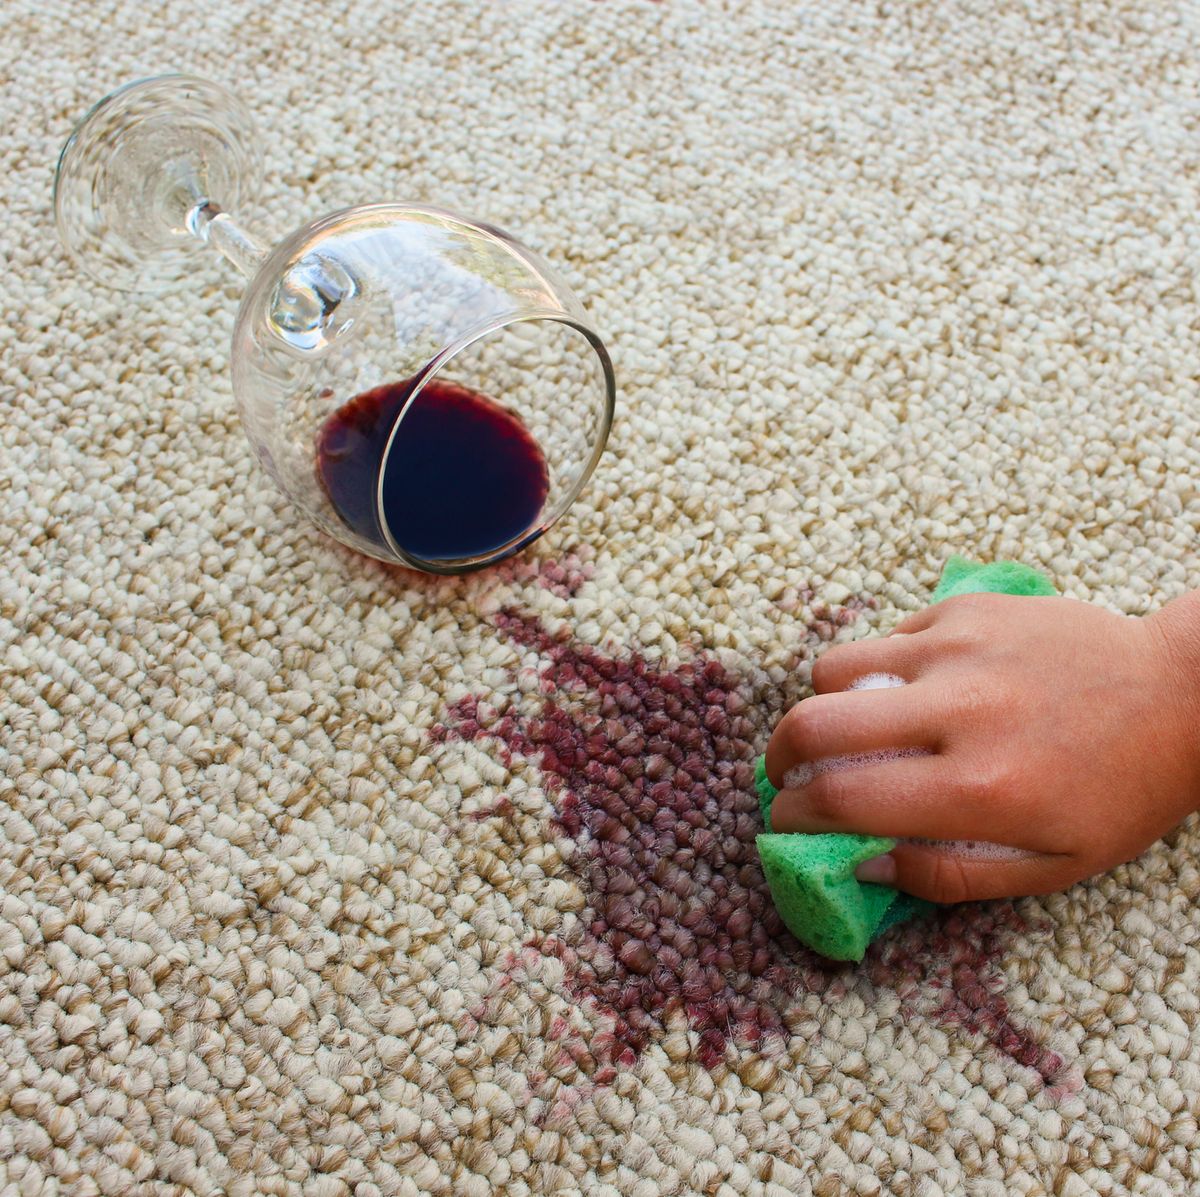 How To Clean Carpet Best Way Get